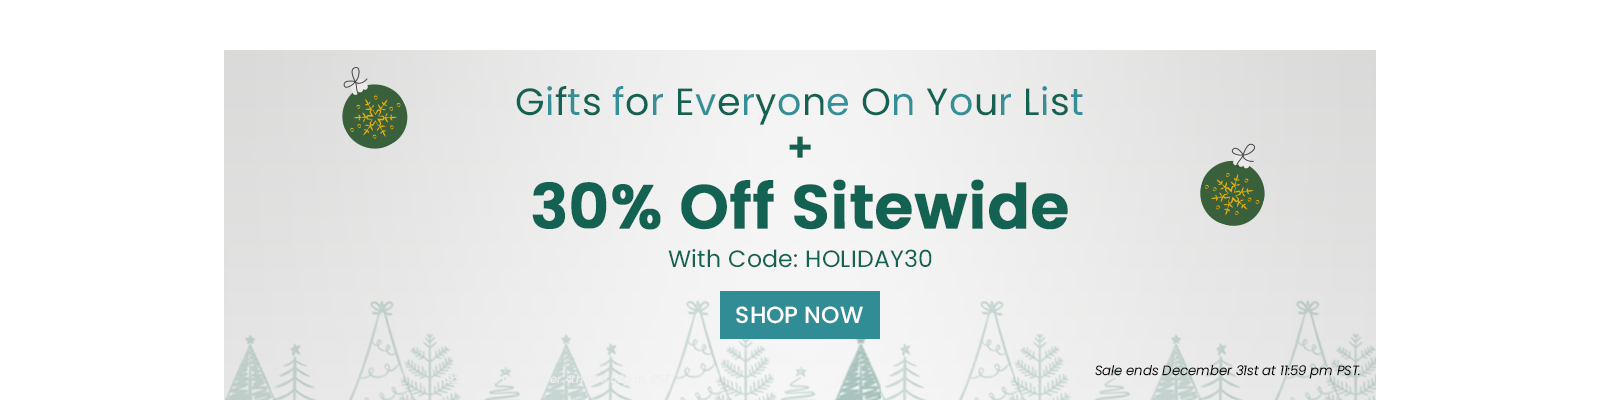 Gifts for Everyone On Your List plus 30 percent Off Sitewide With Code HOLIDAY30. Shop Now. Sale Ends December 31st